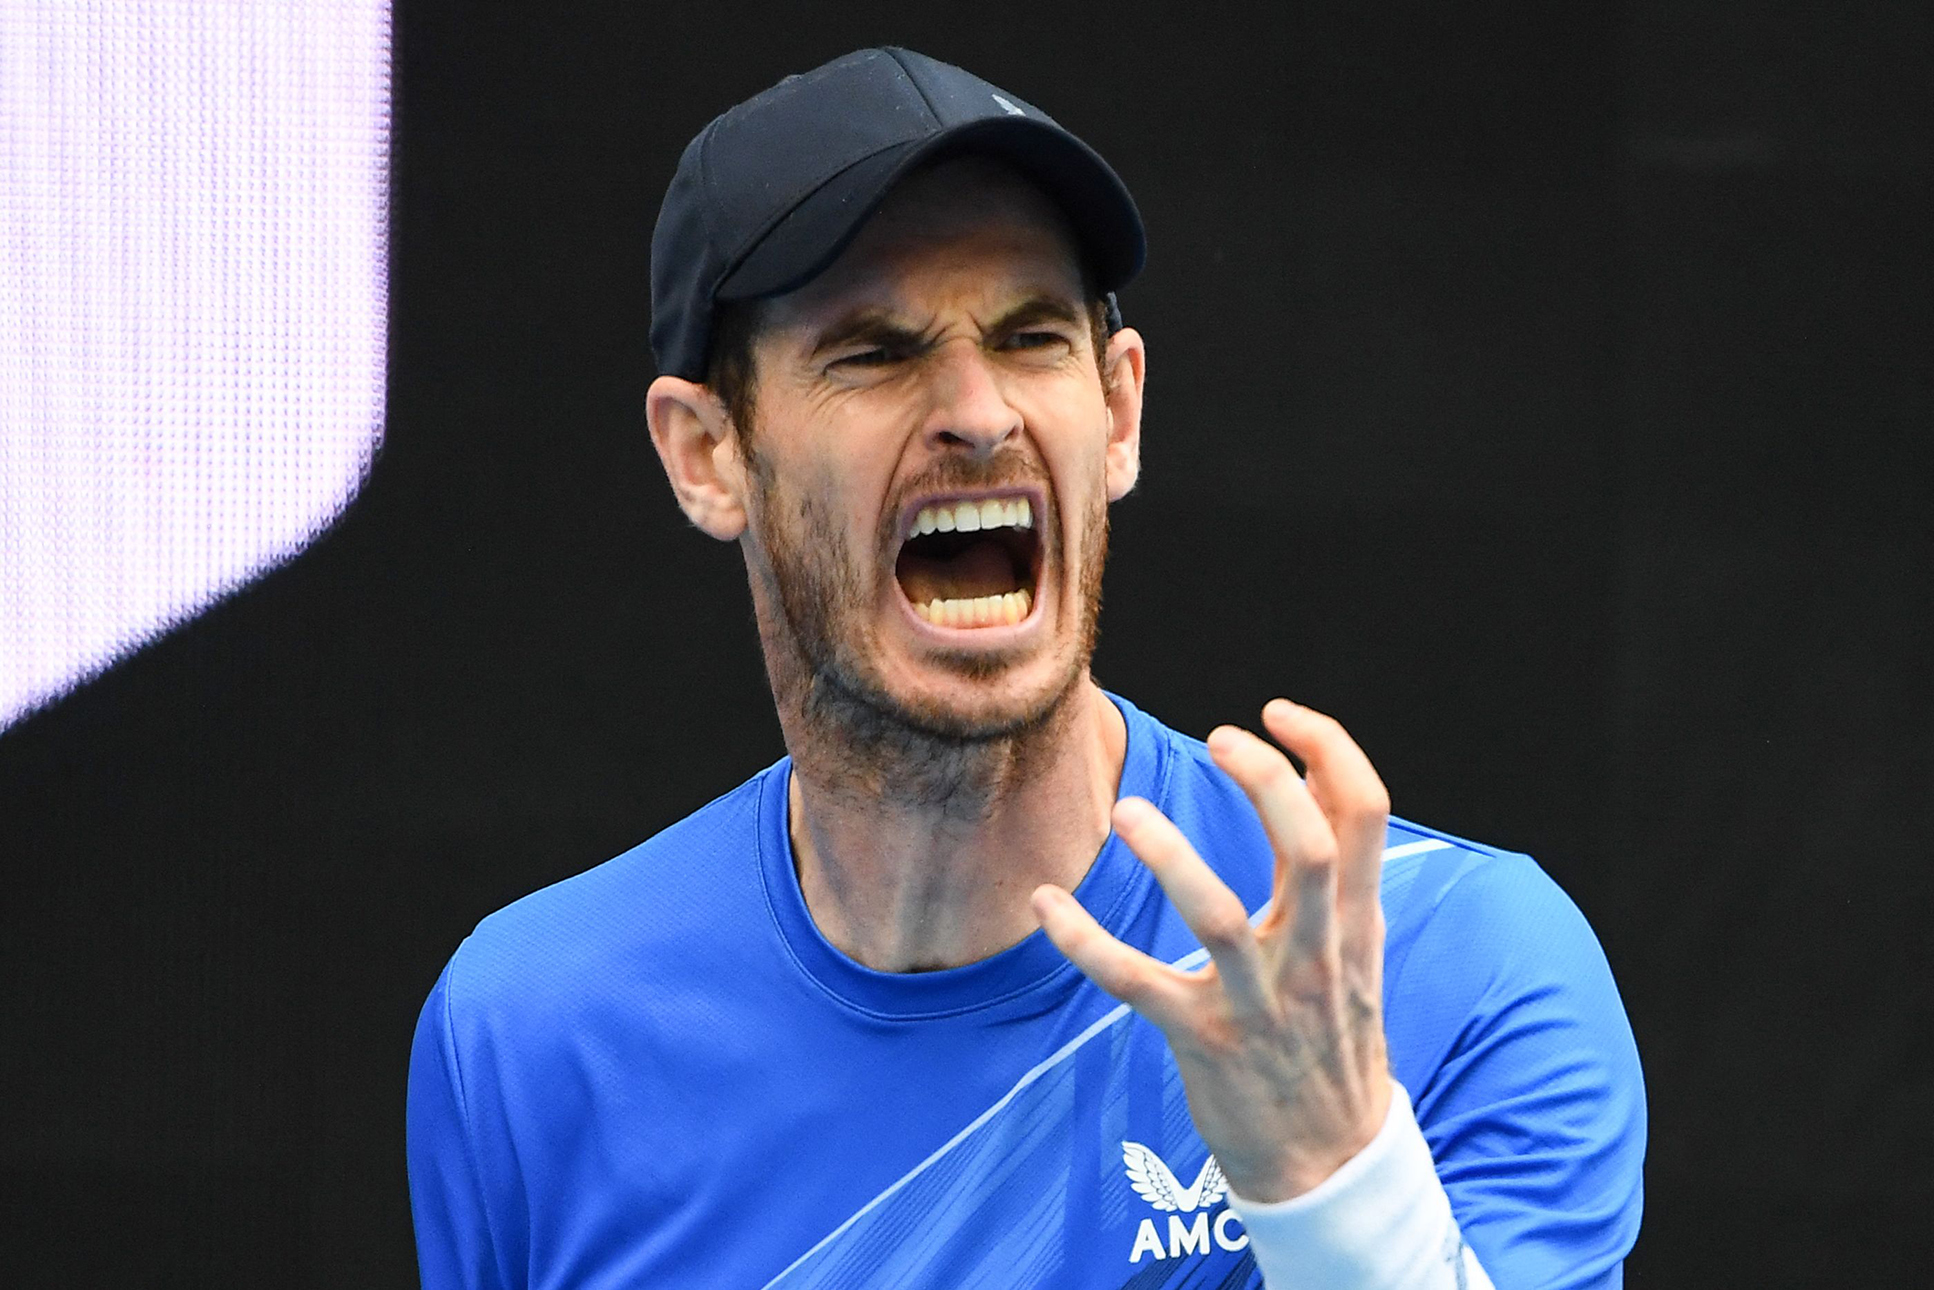 MELBOURNE: Britain’s Andy Murray reacts as he plays against Georgia’s Nikoloz Basilashvili during their men’s singles match on day two of the Australian Open tennis tournament yesterday. — AFP